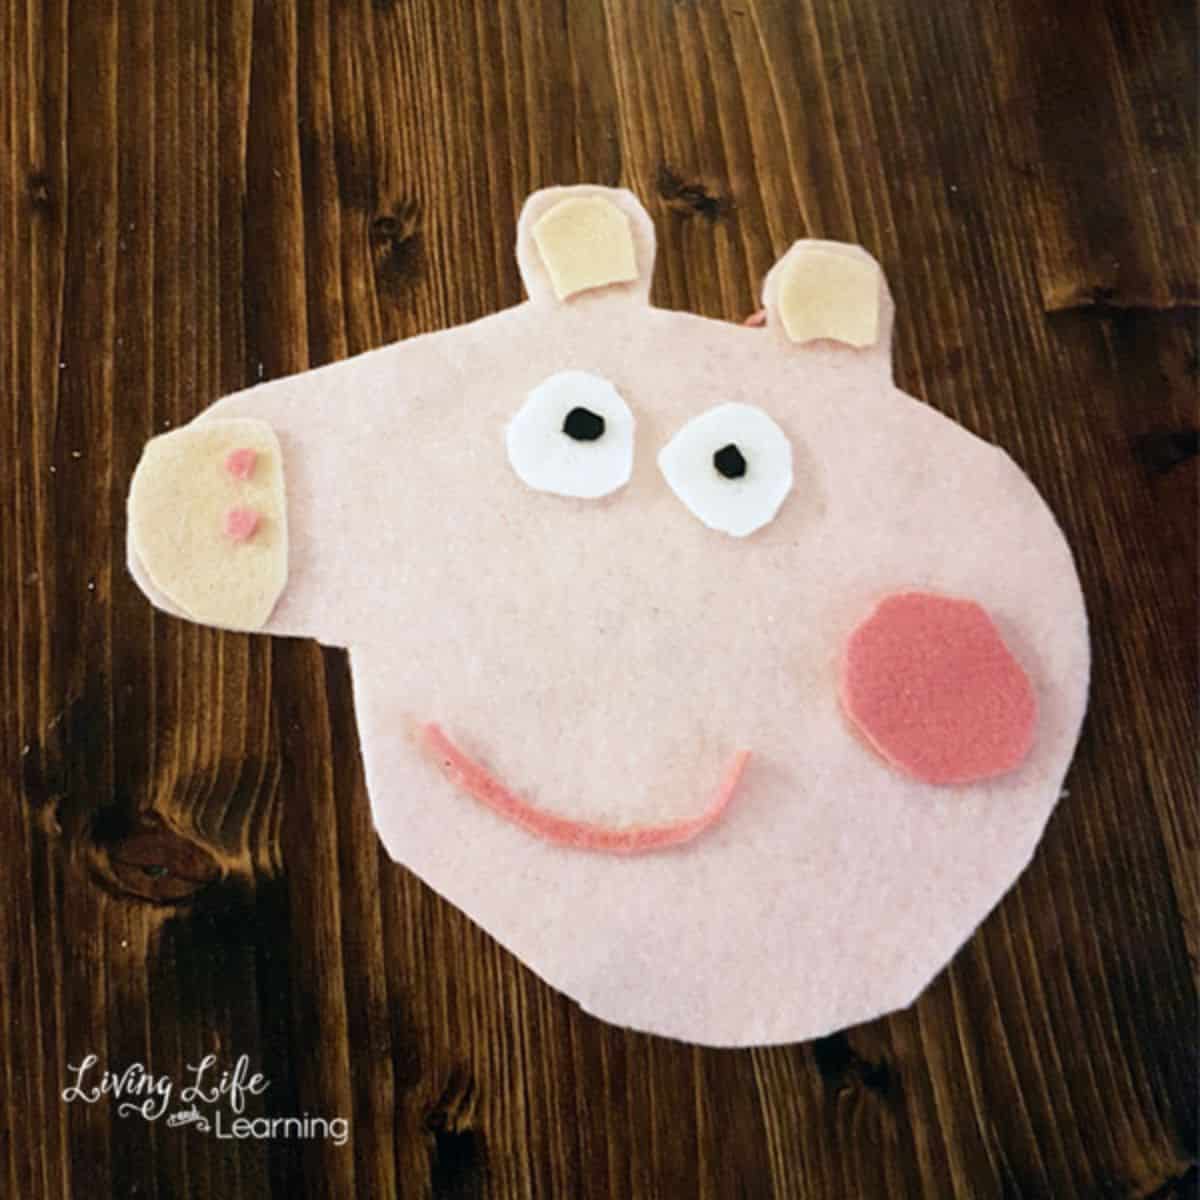 Peppa pig insipred christmas decor on a wooden table.